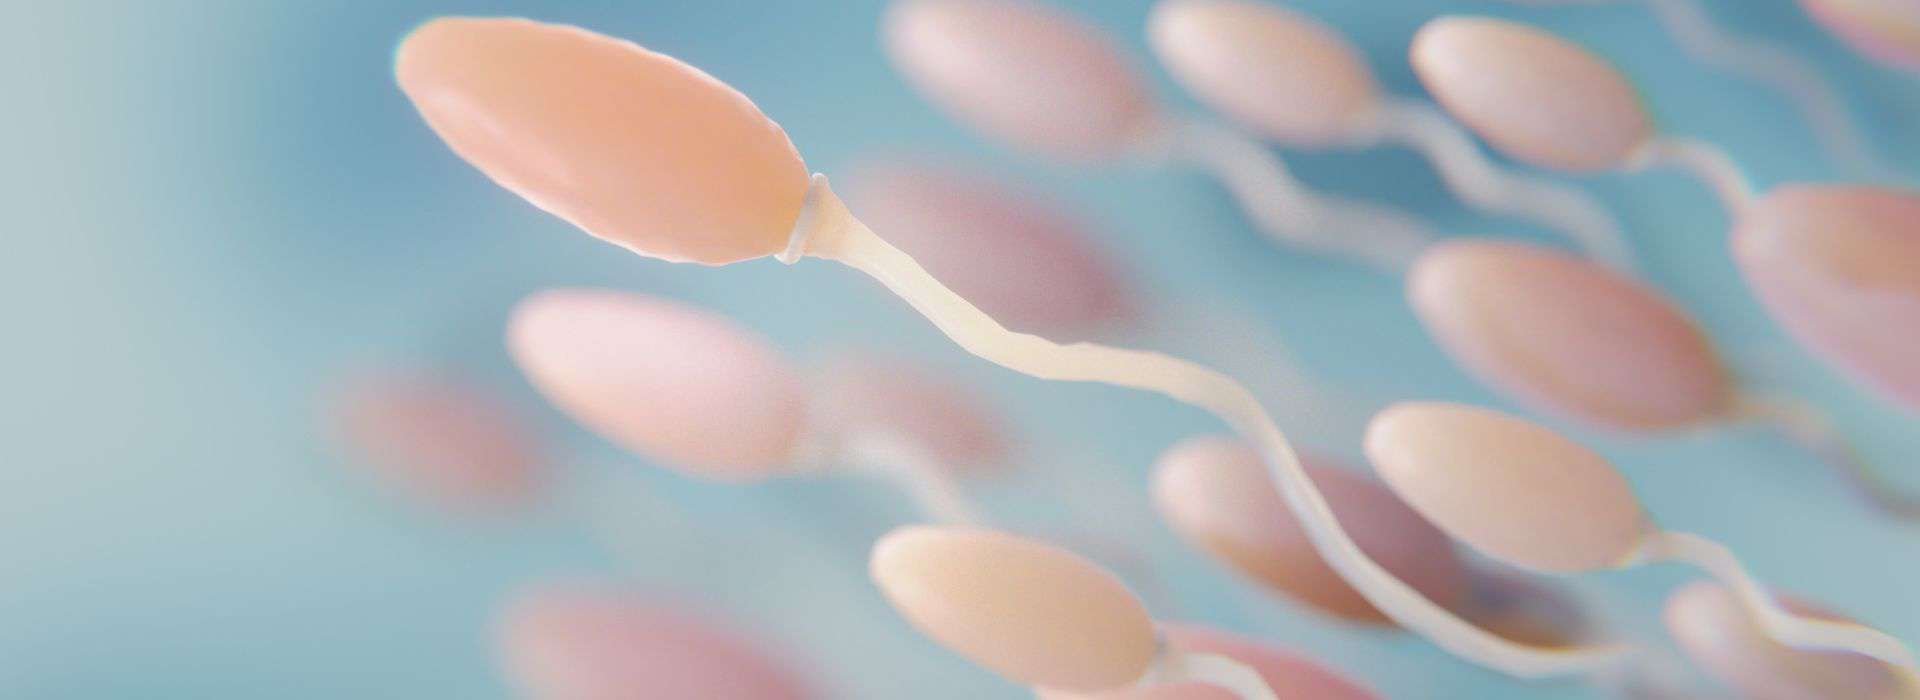 All You Need To Know About Spermatogenesis